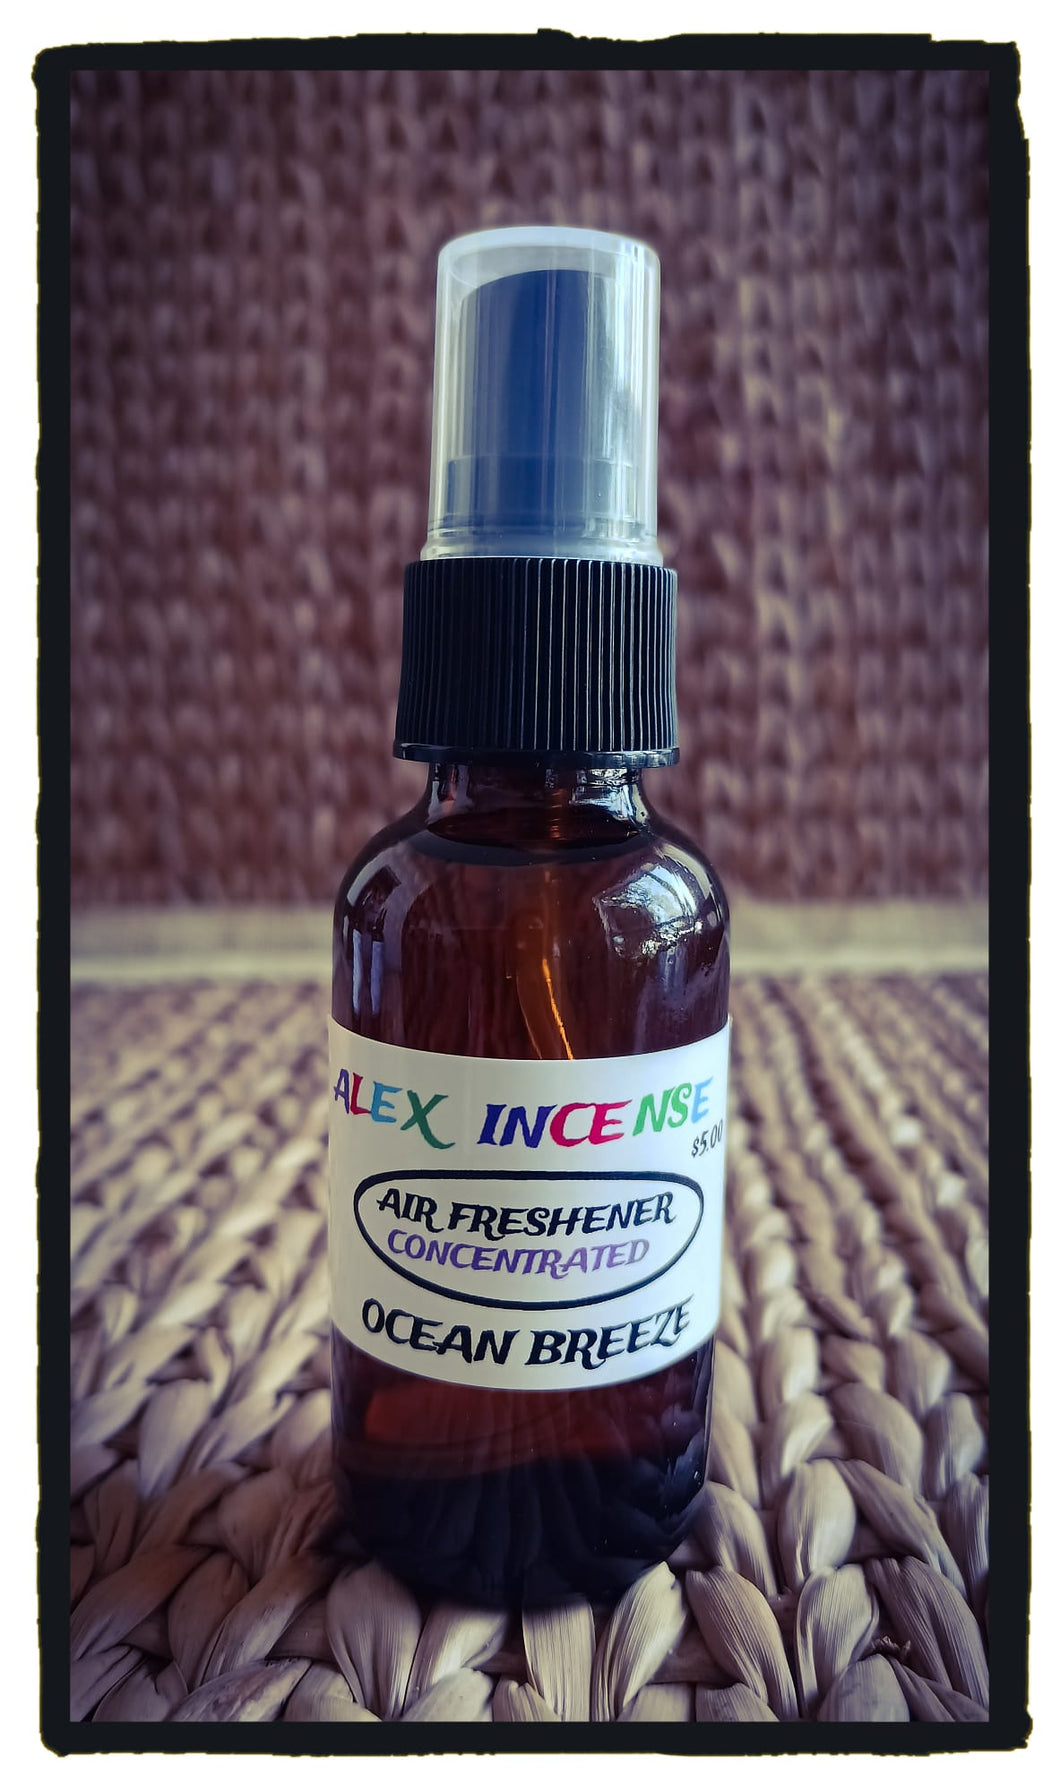 Air freshener concentrate